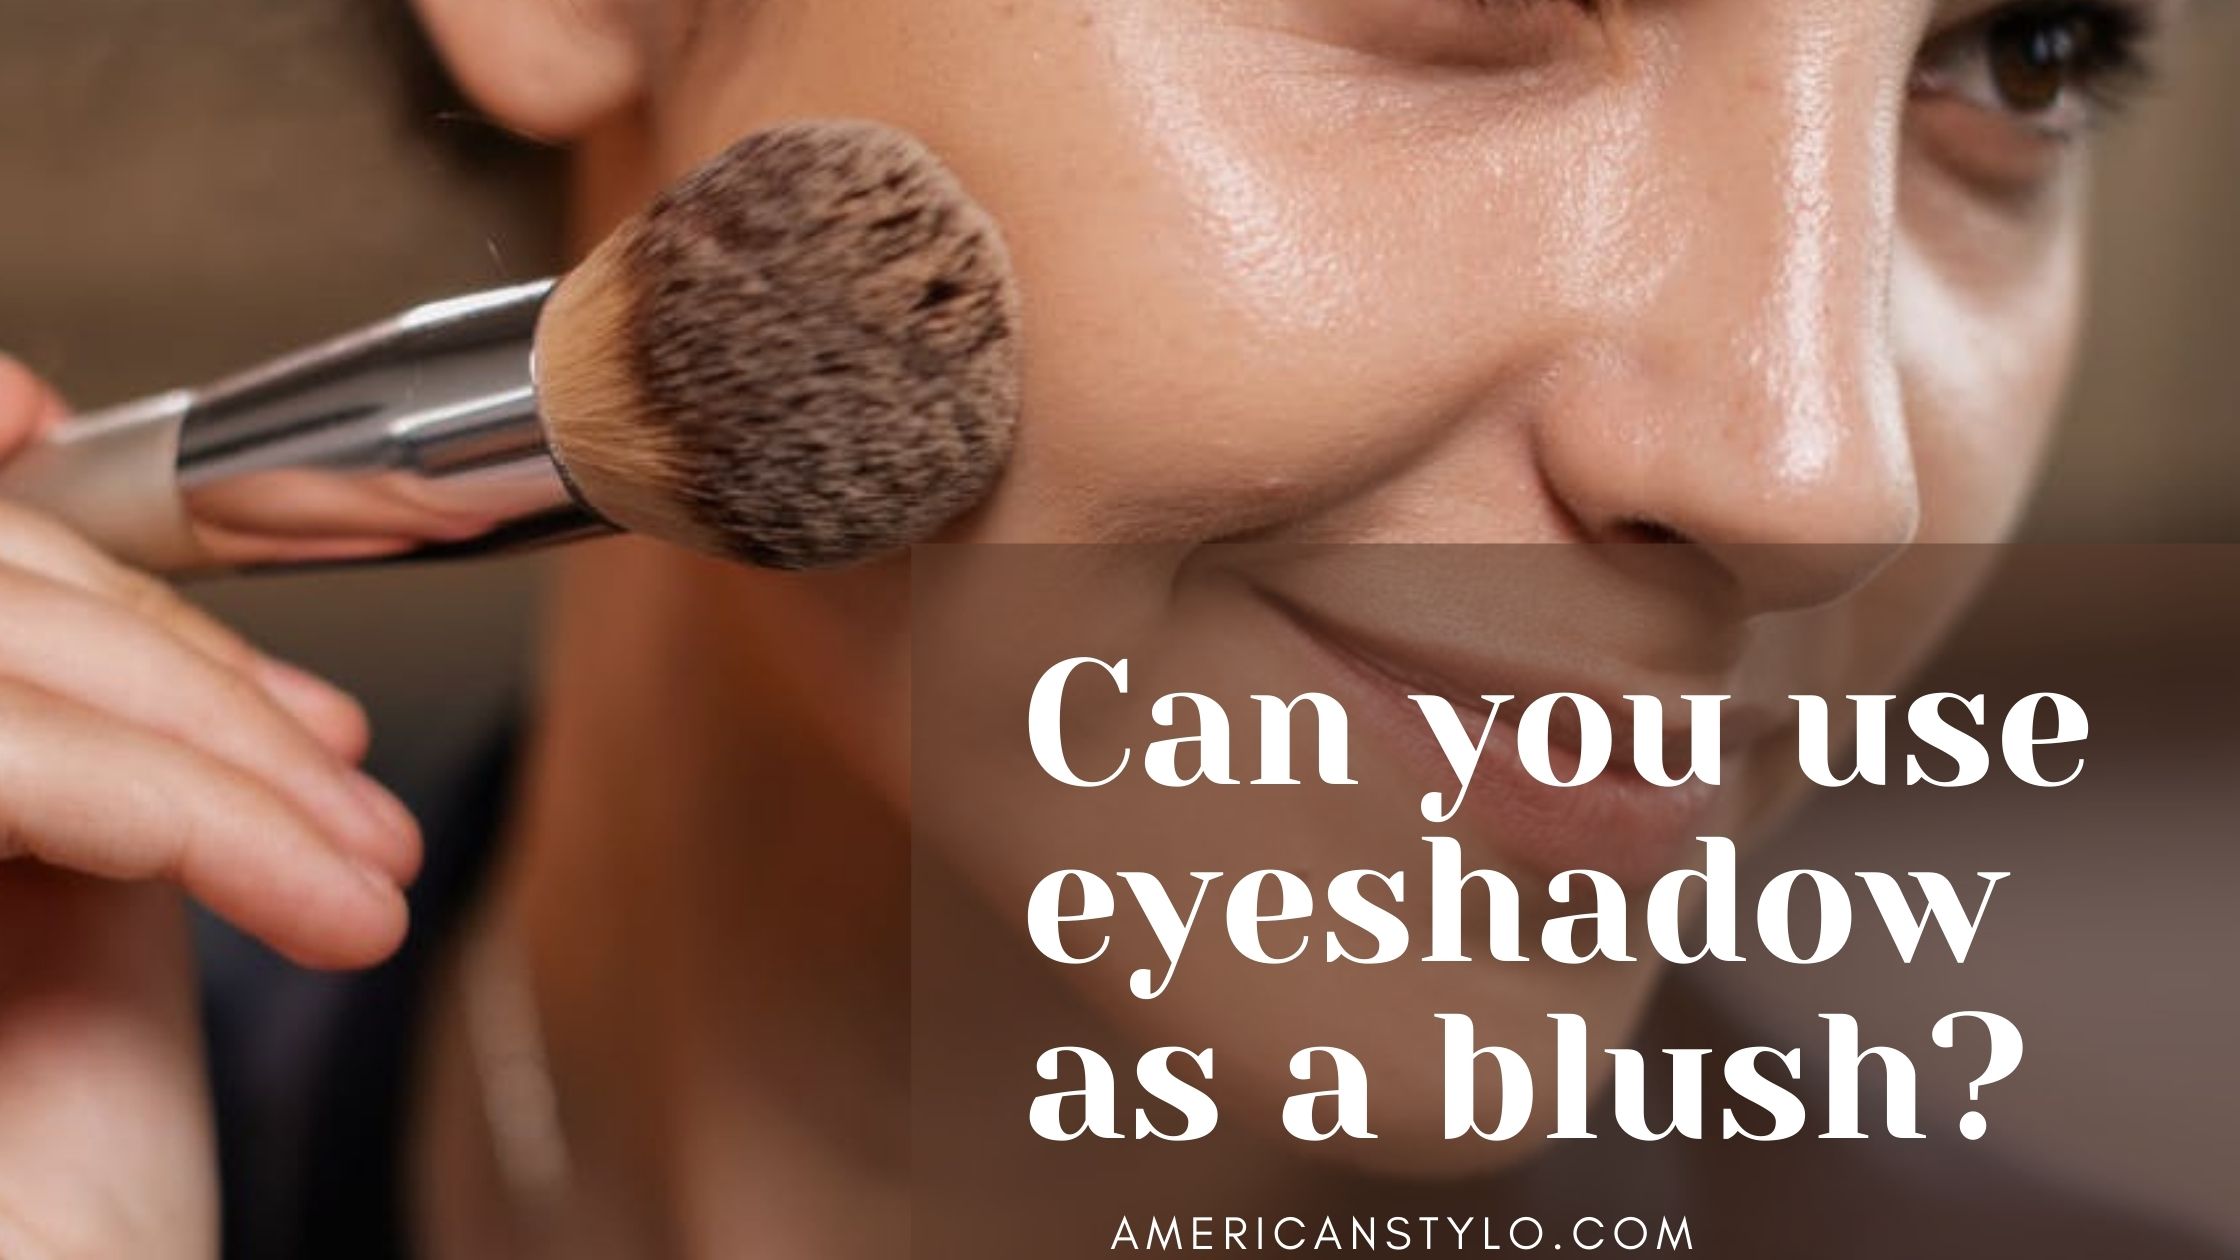 Can you use eyeshadow as a blush?